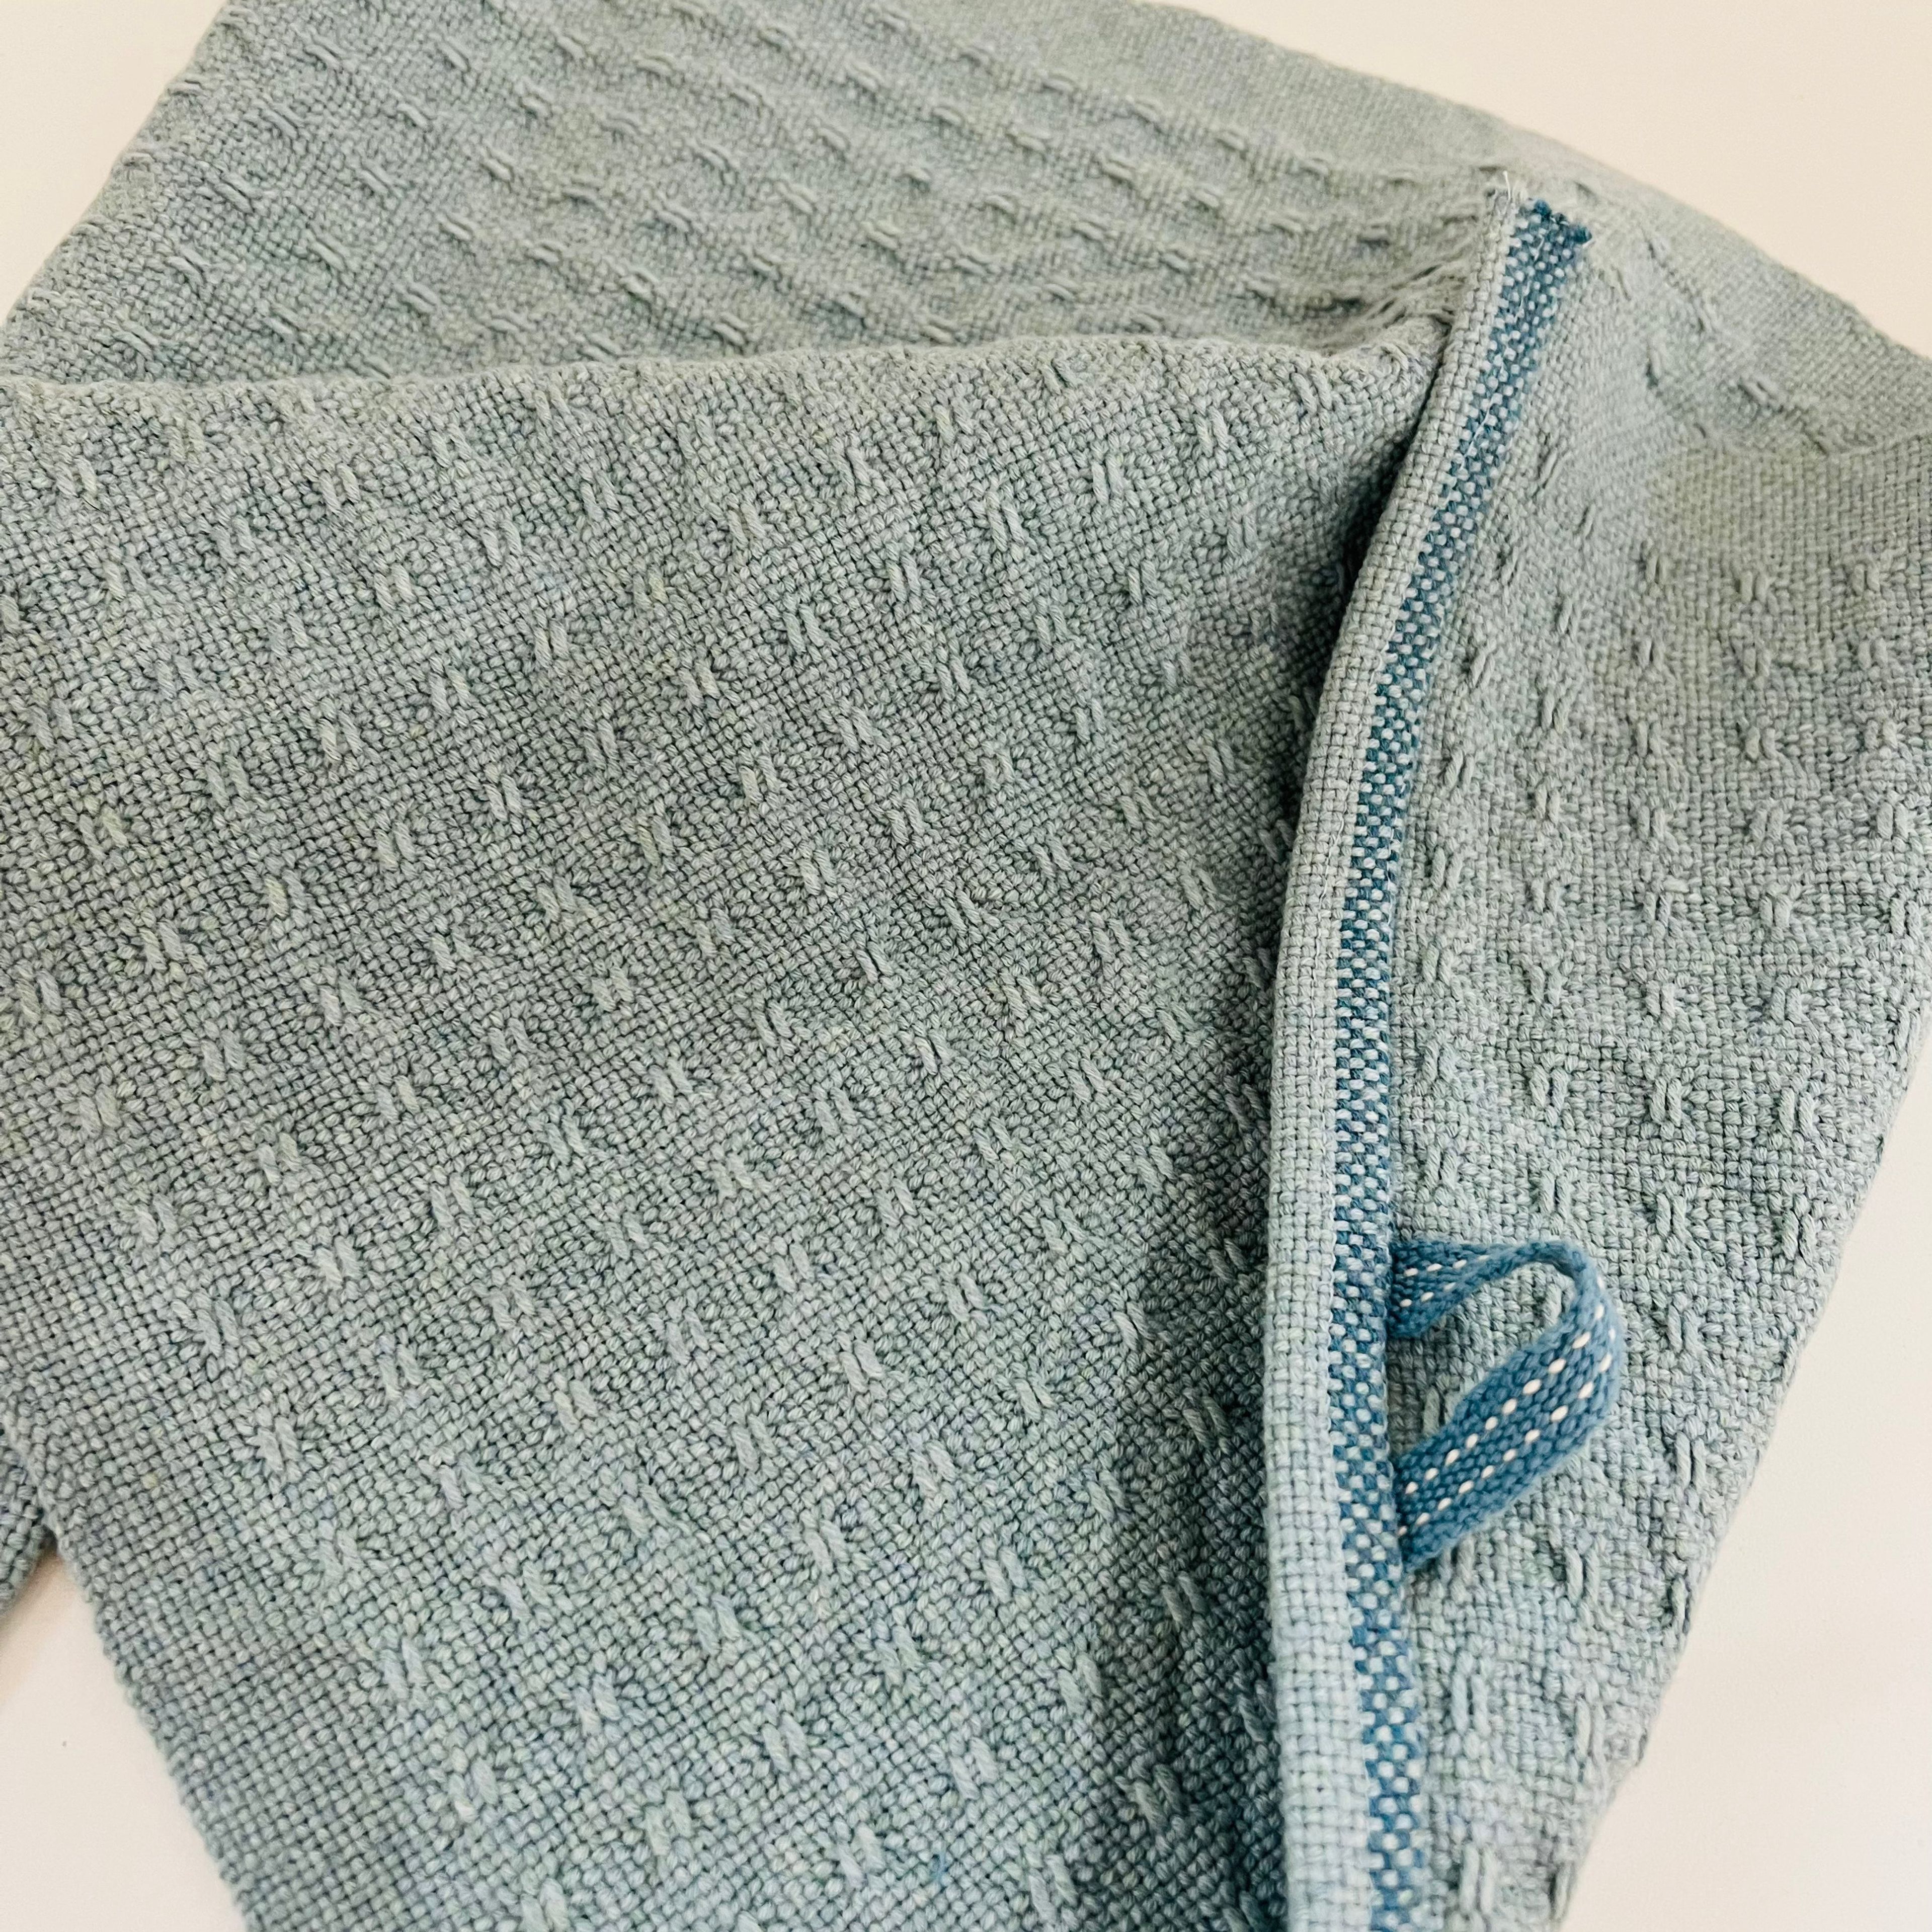 Woven Towel Mineral Blue